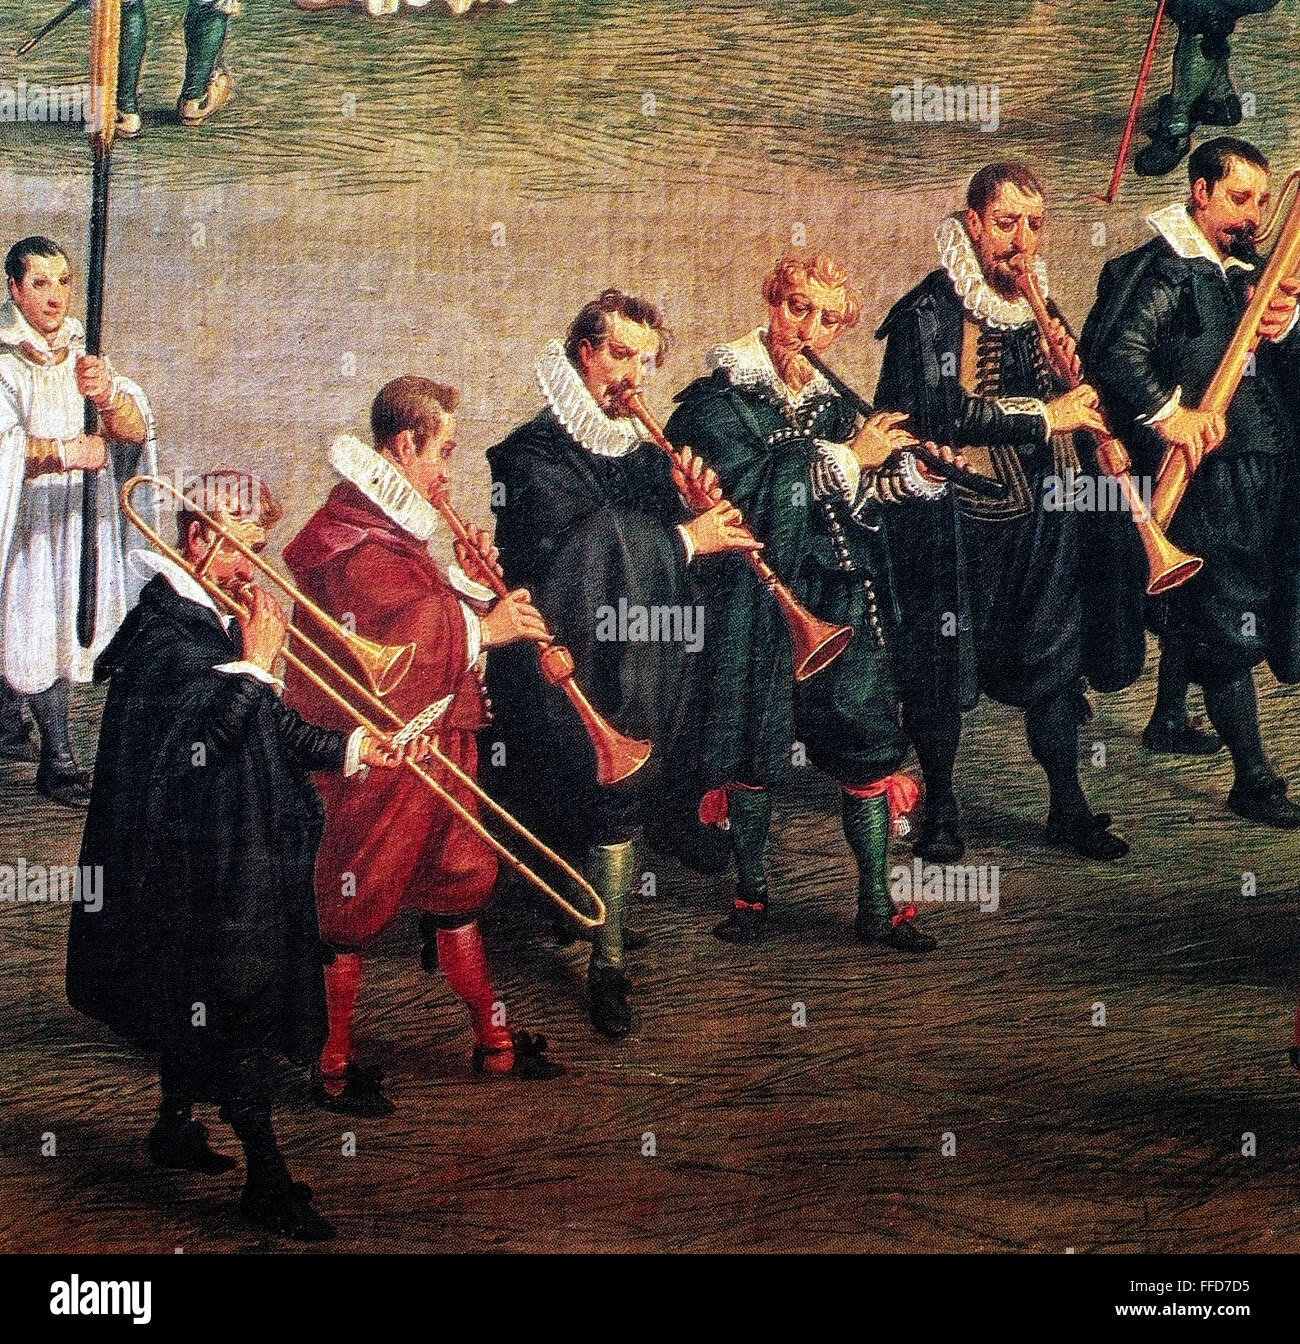 MUSICIANS, c1600. /nA Spanish wind ensemble. Detail of a painting, c1600. Stock Photo